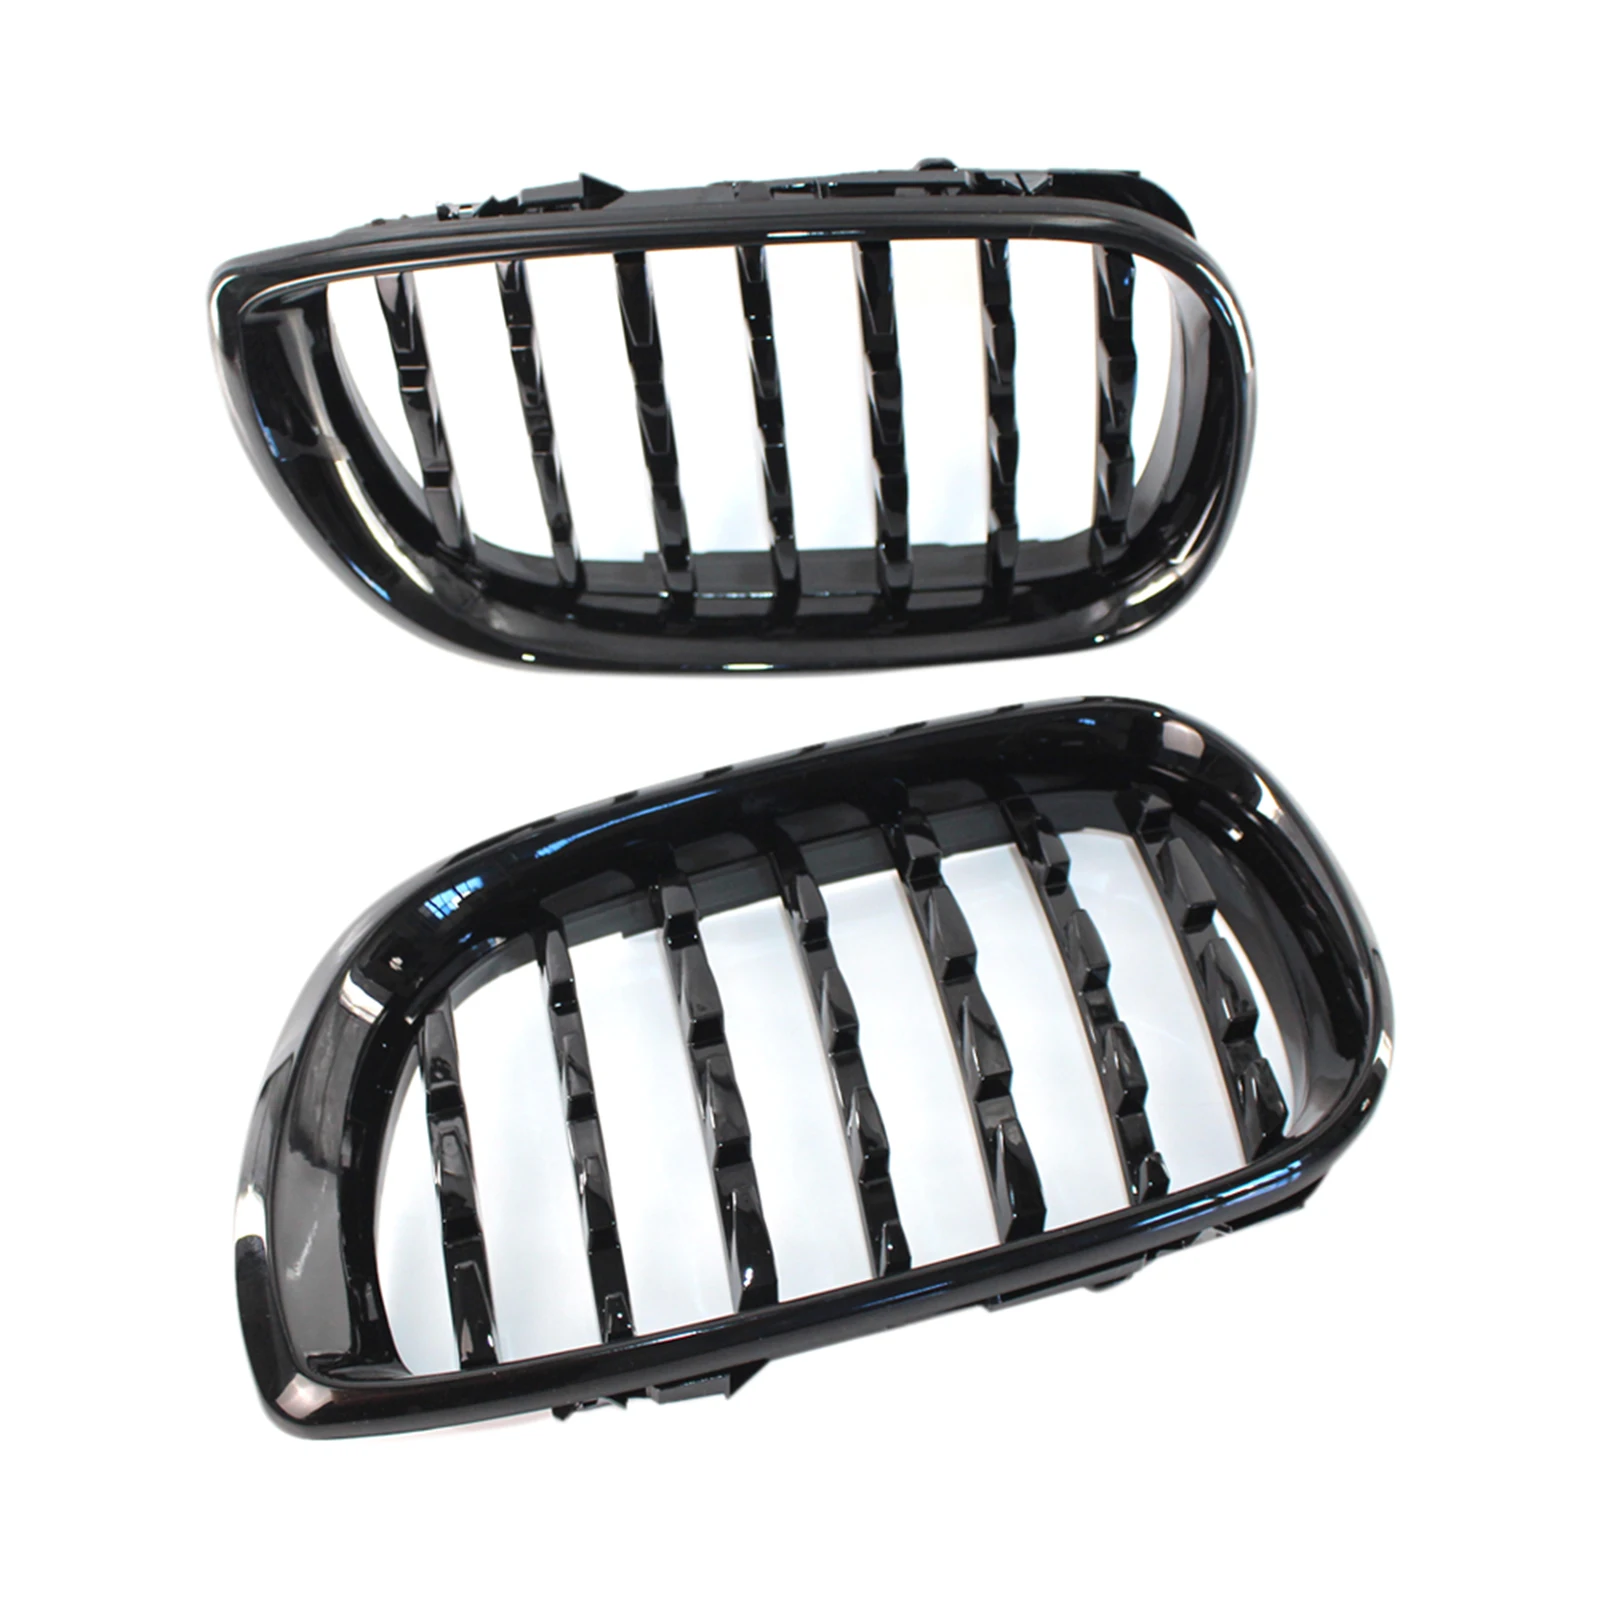 Auto Front Kidney Grille for BMW 3 Series E46 4 Door 2002 2003 2004 2005